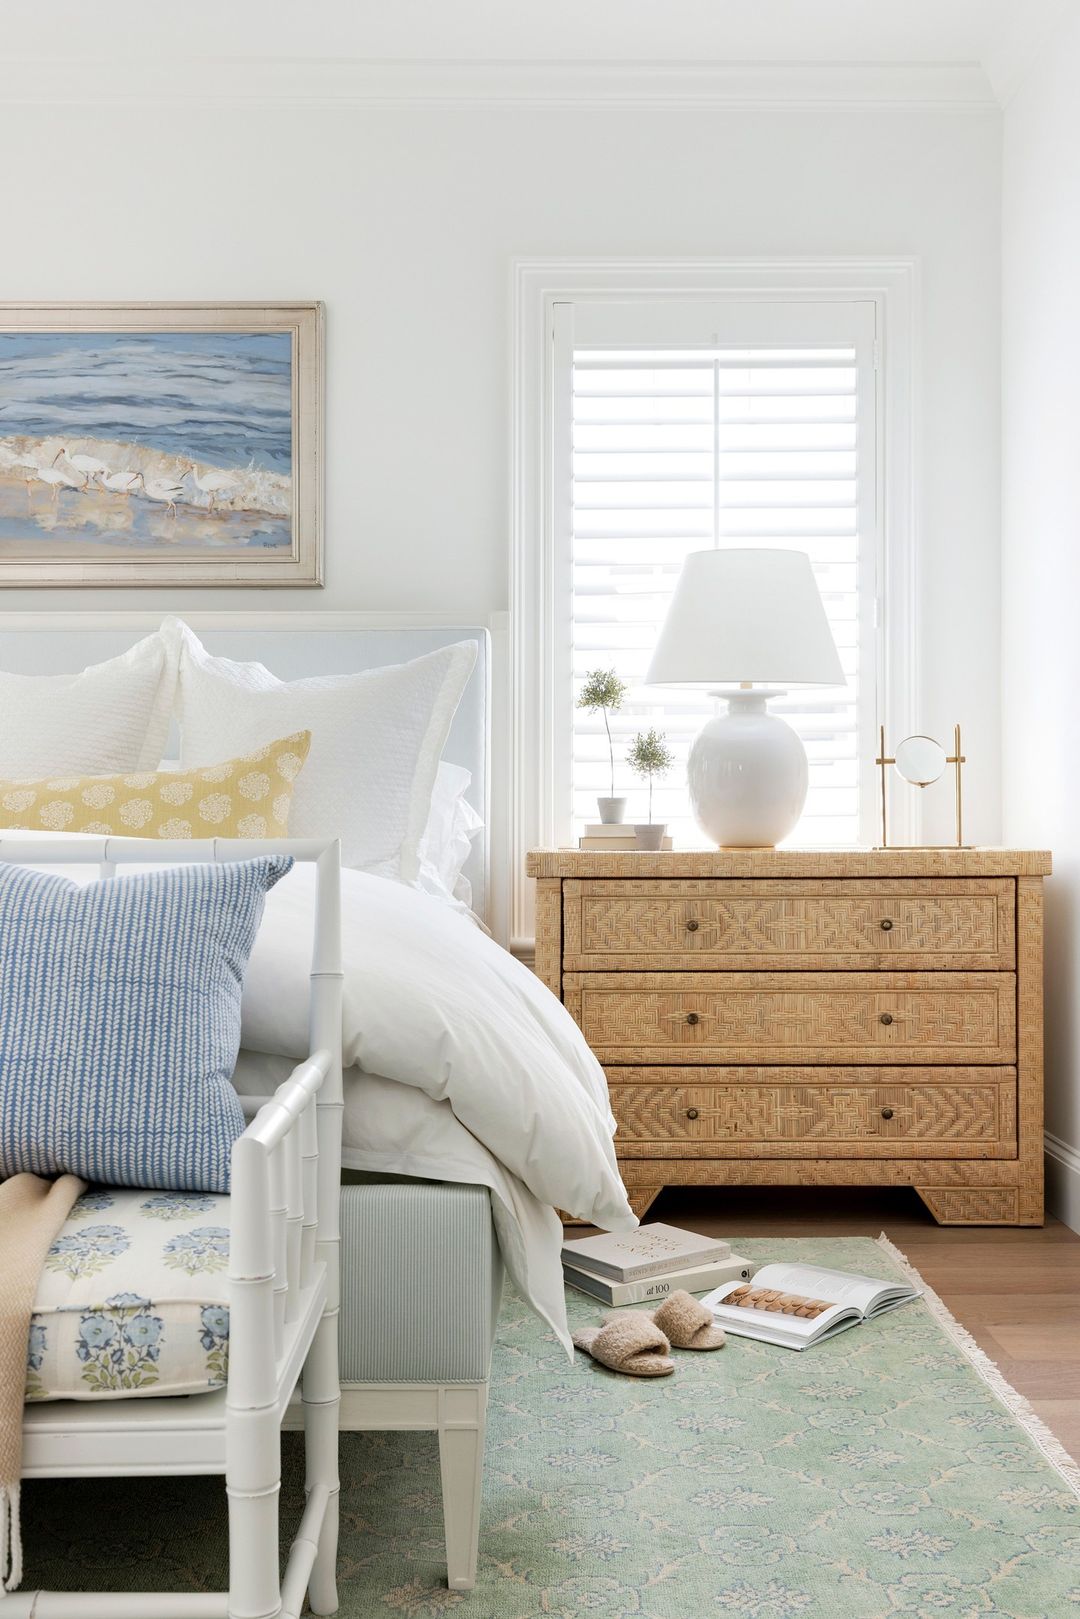 Mix Patterns and Textures for a Cozy Coastal Feel